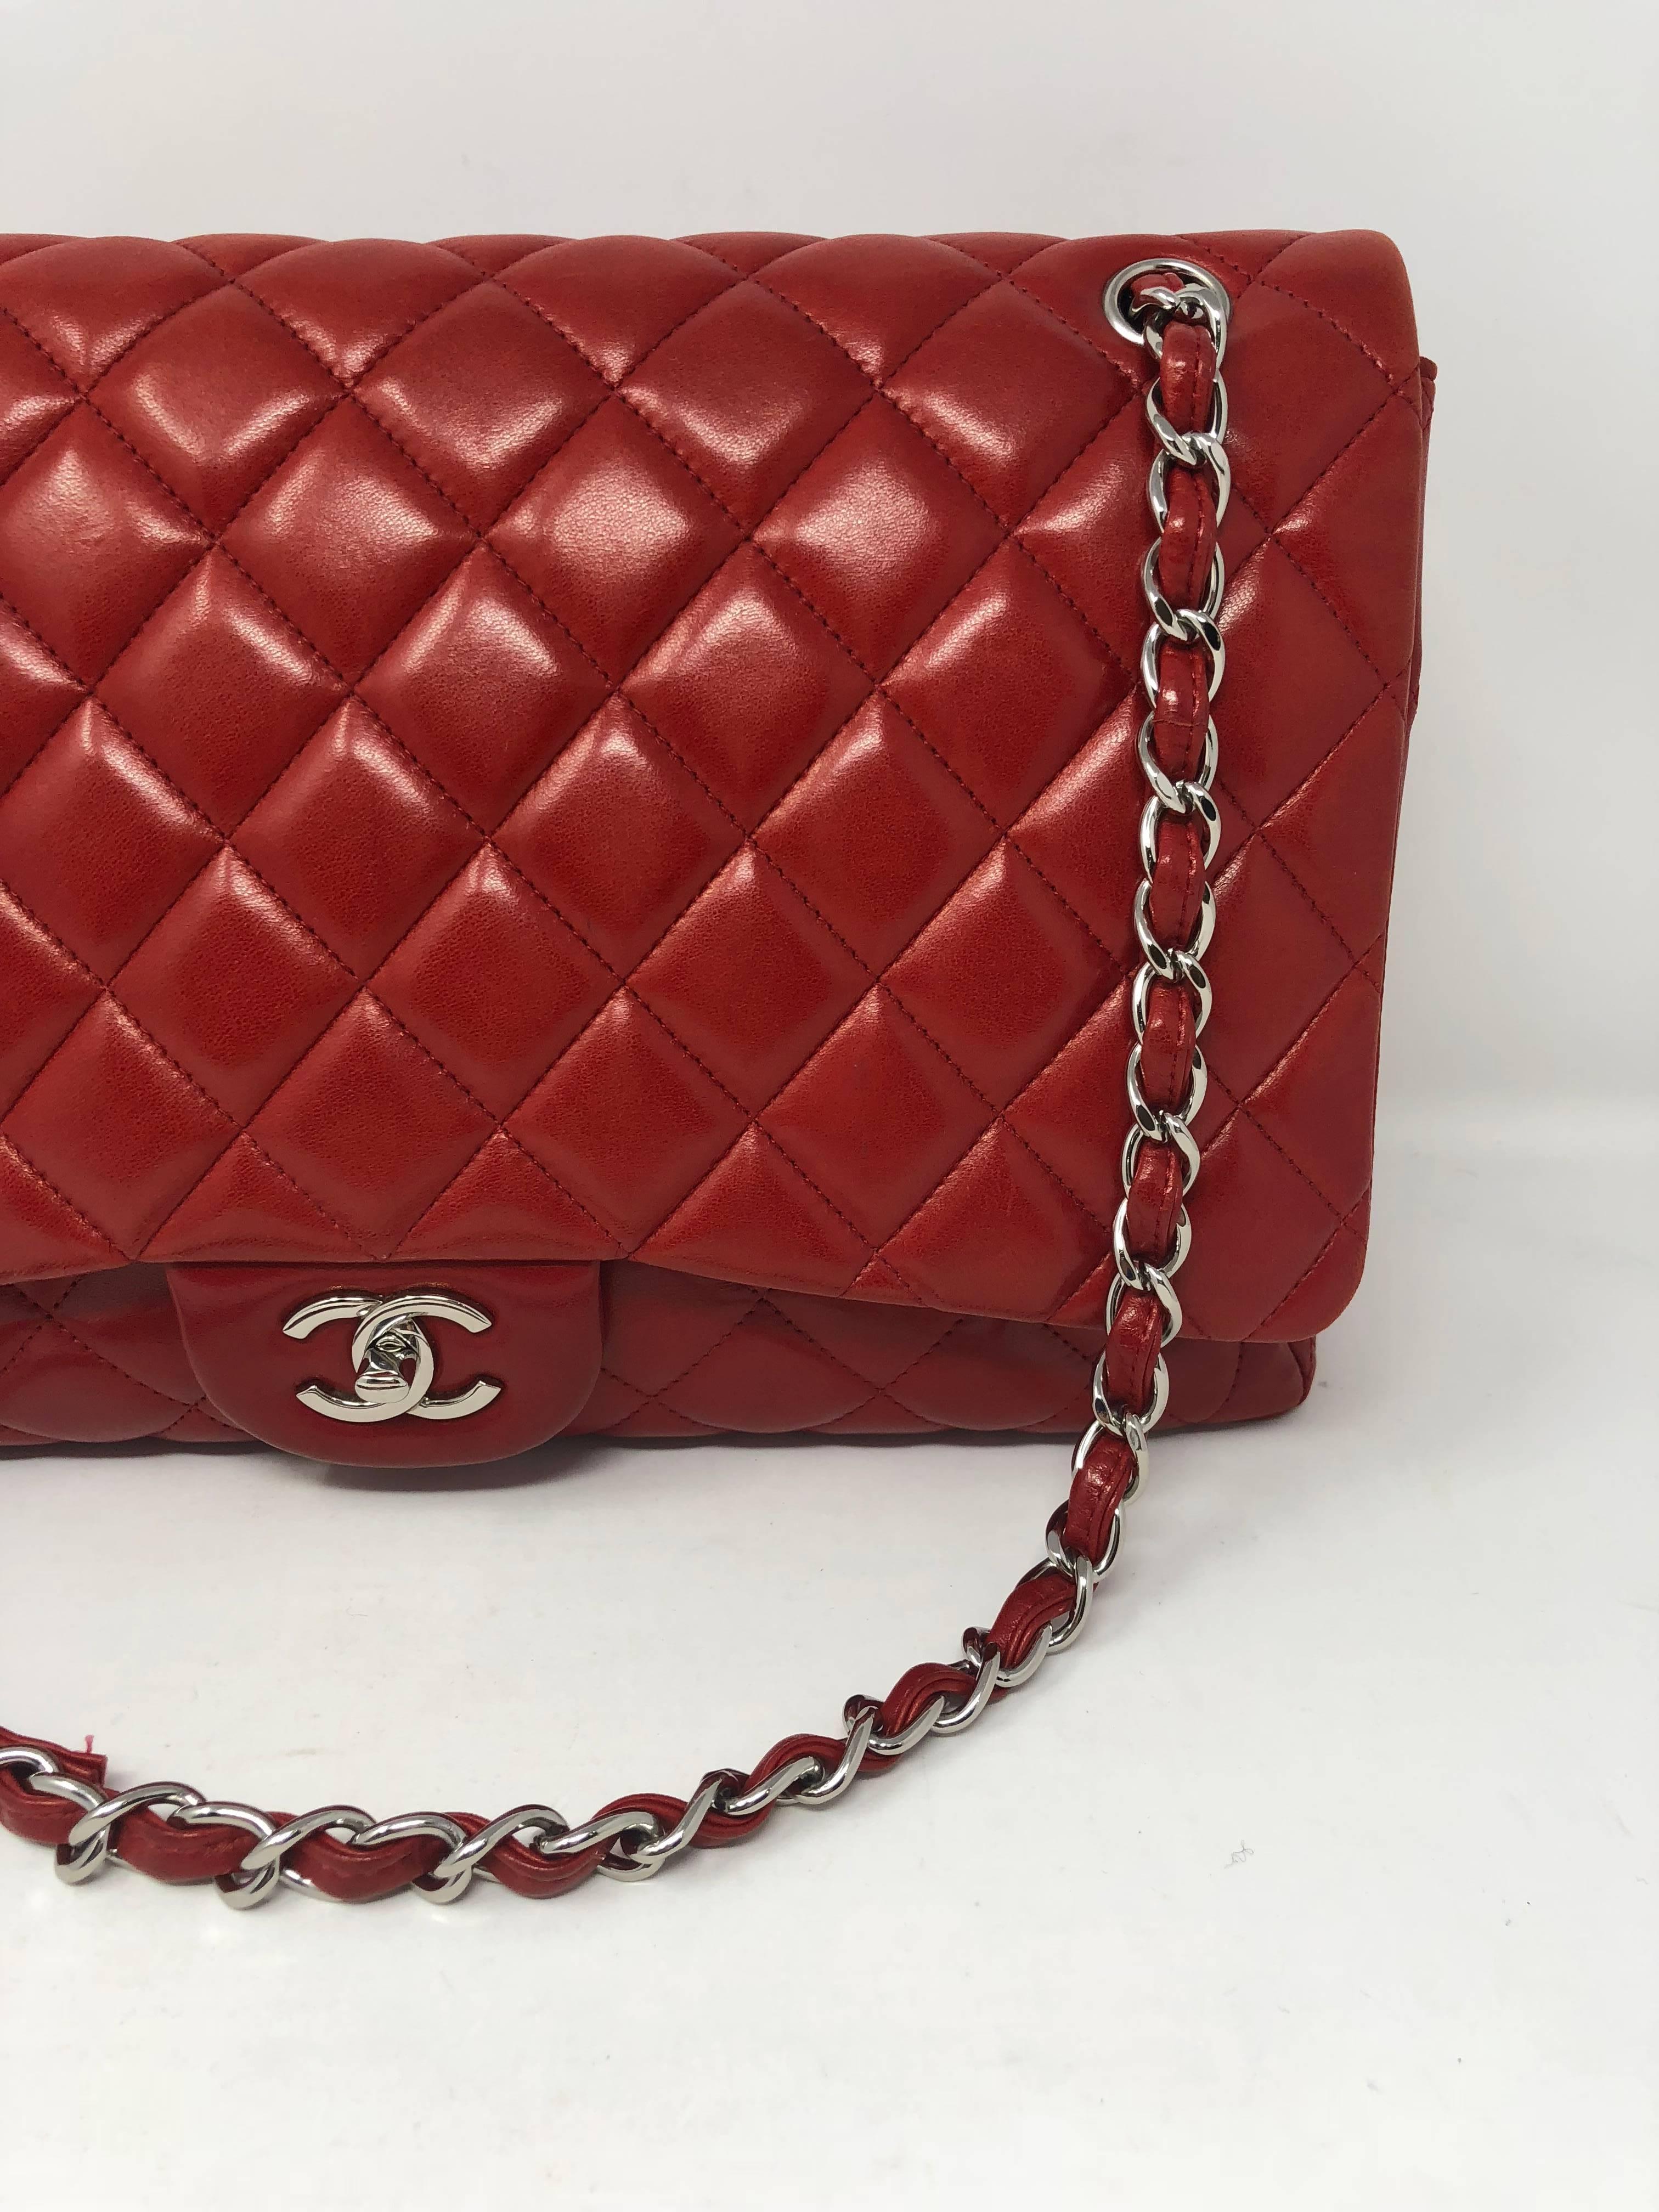 Red Chanel Maxi Single Flap Bag in lambskin leather. Silver hardware and can be worn doubled chain on the shoulder or as a crossbody bag. Has some wear but lots of life left. 